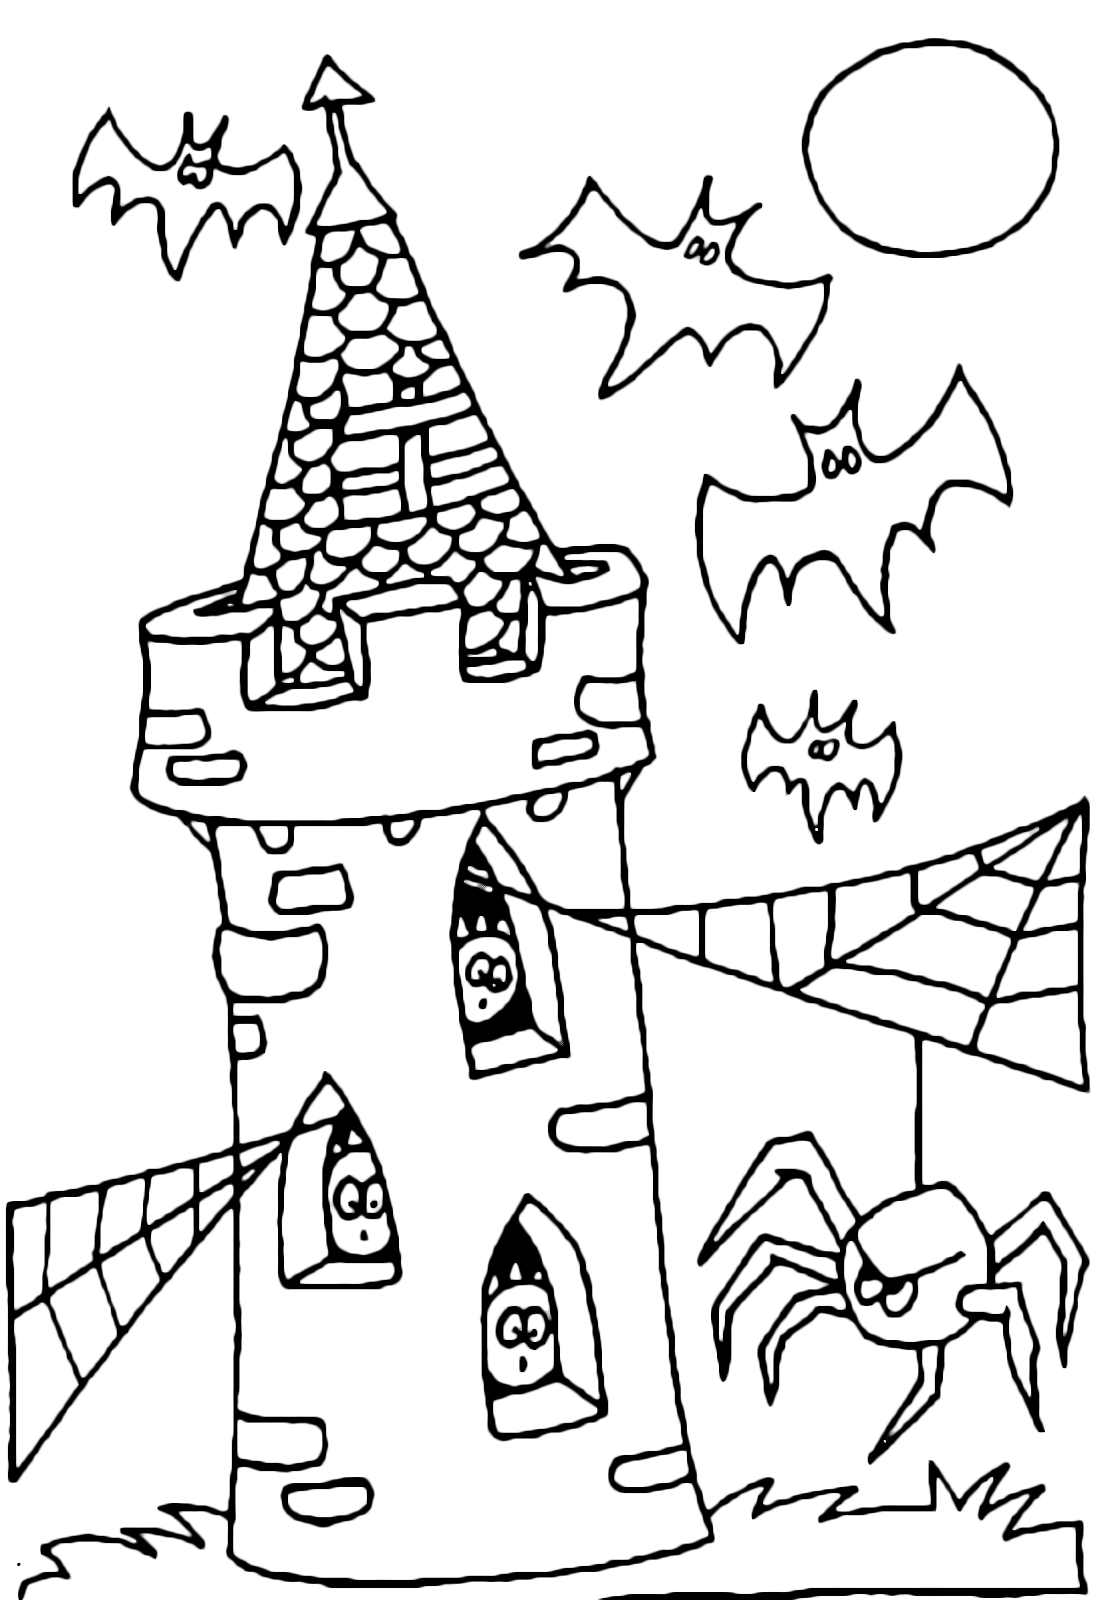 Halloween - Bats attack the spiders on the tower